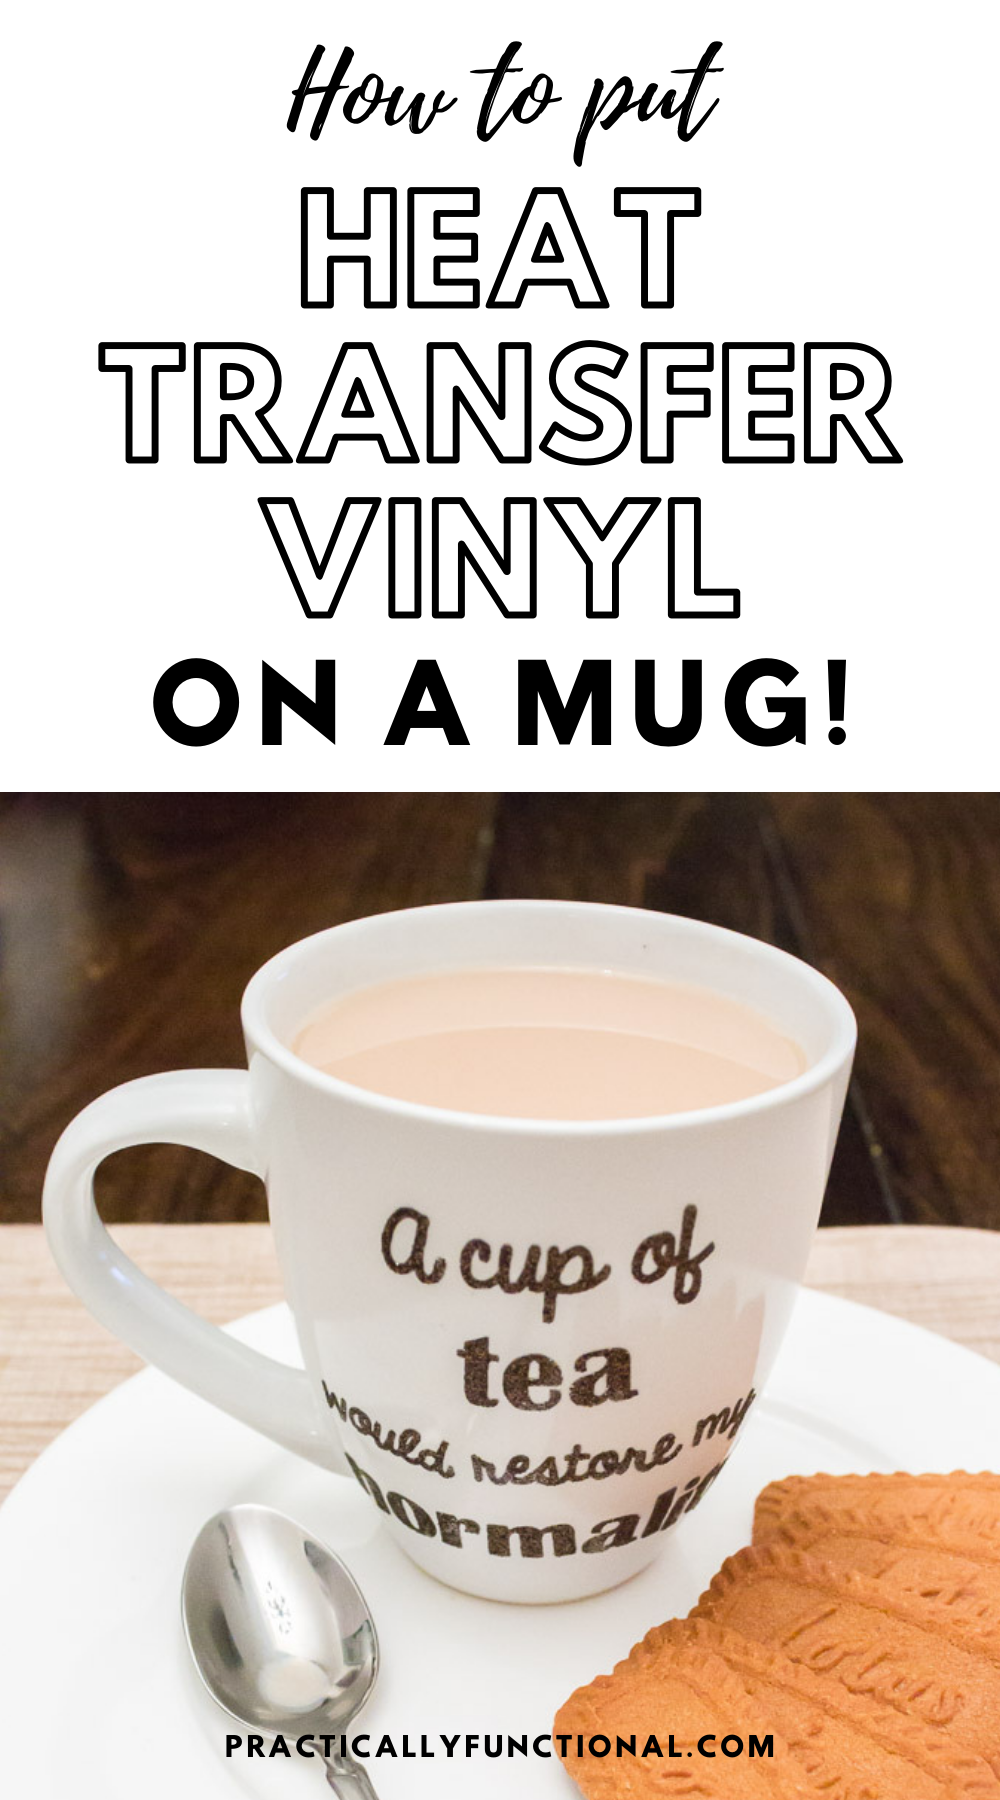 How To Use Heat Transfer Vinyl On Mugs Practically Functional